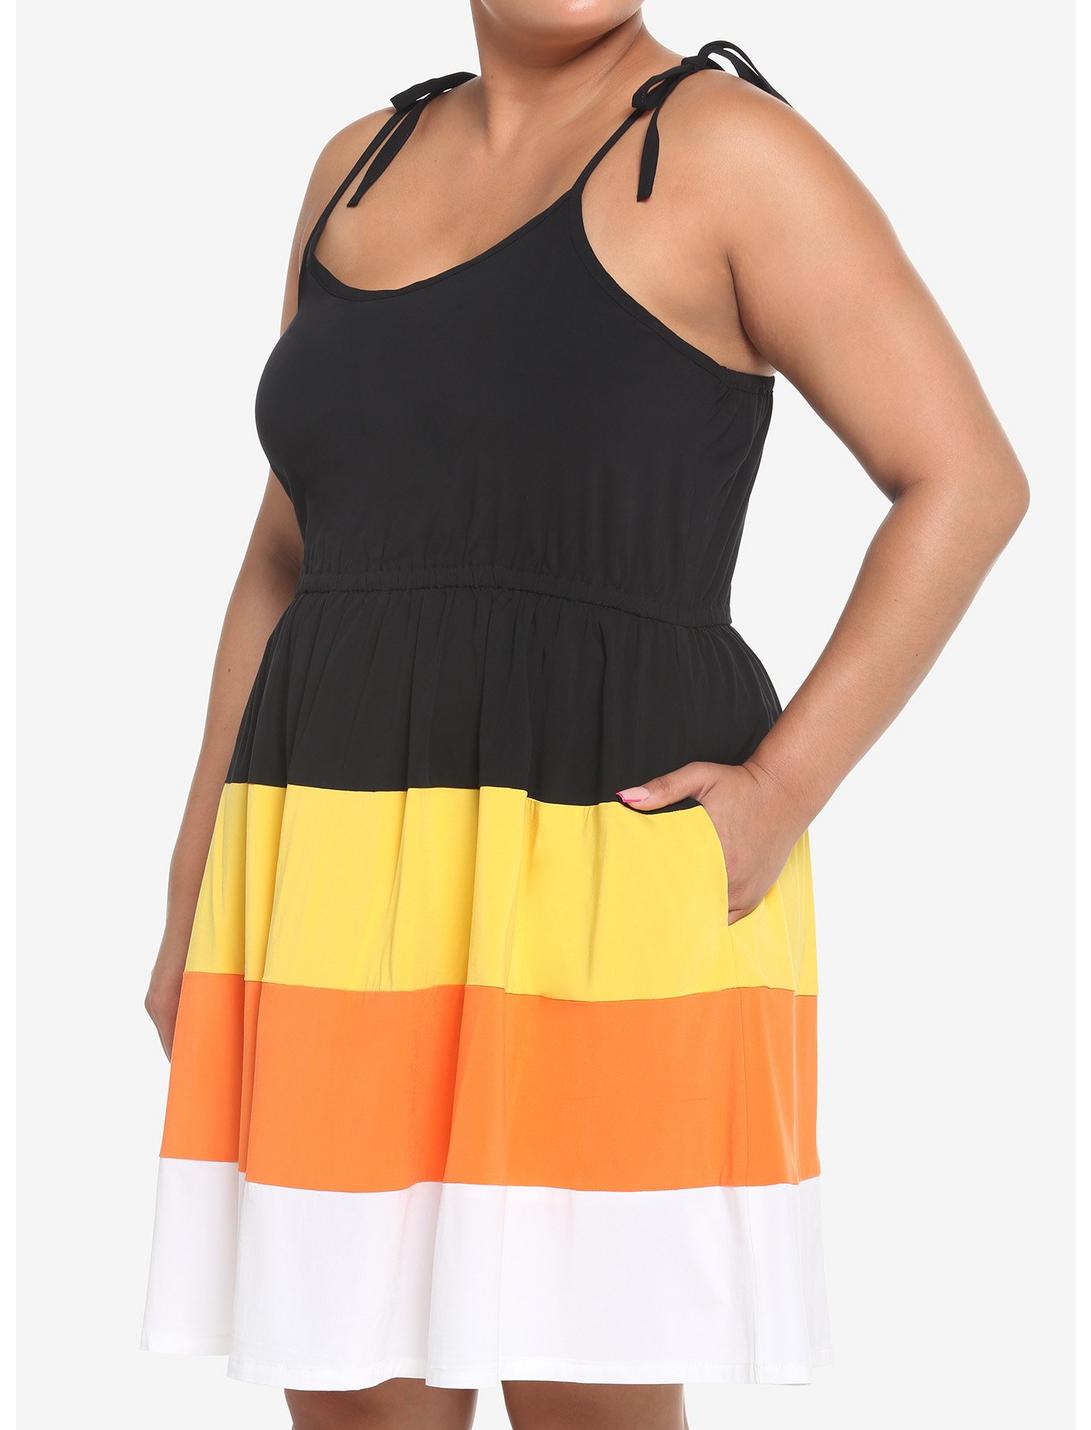 Candy Corn Tiered Dress Plus Size, MULTI, hi-res